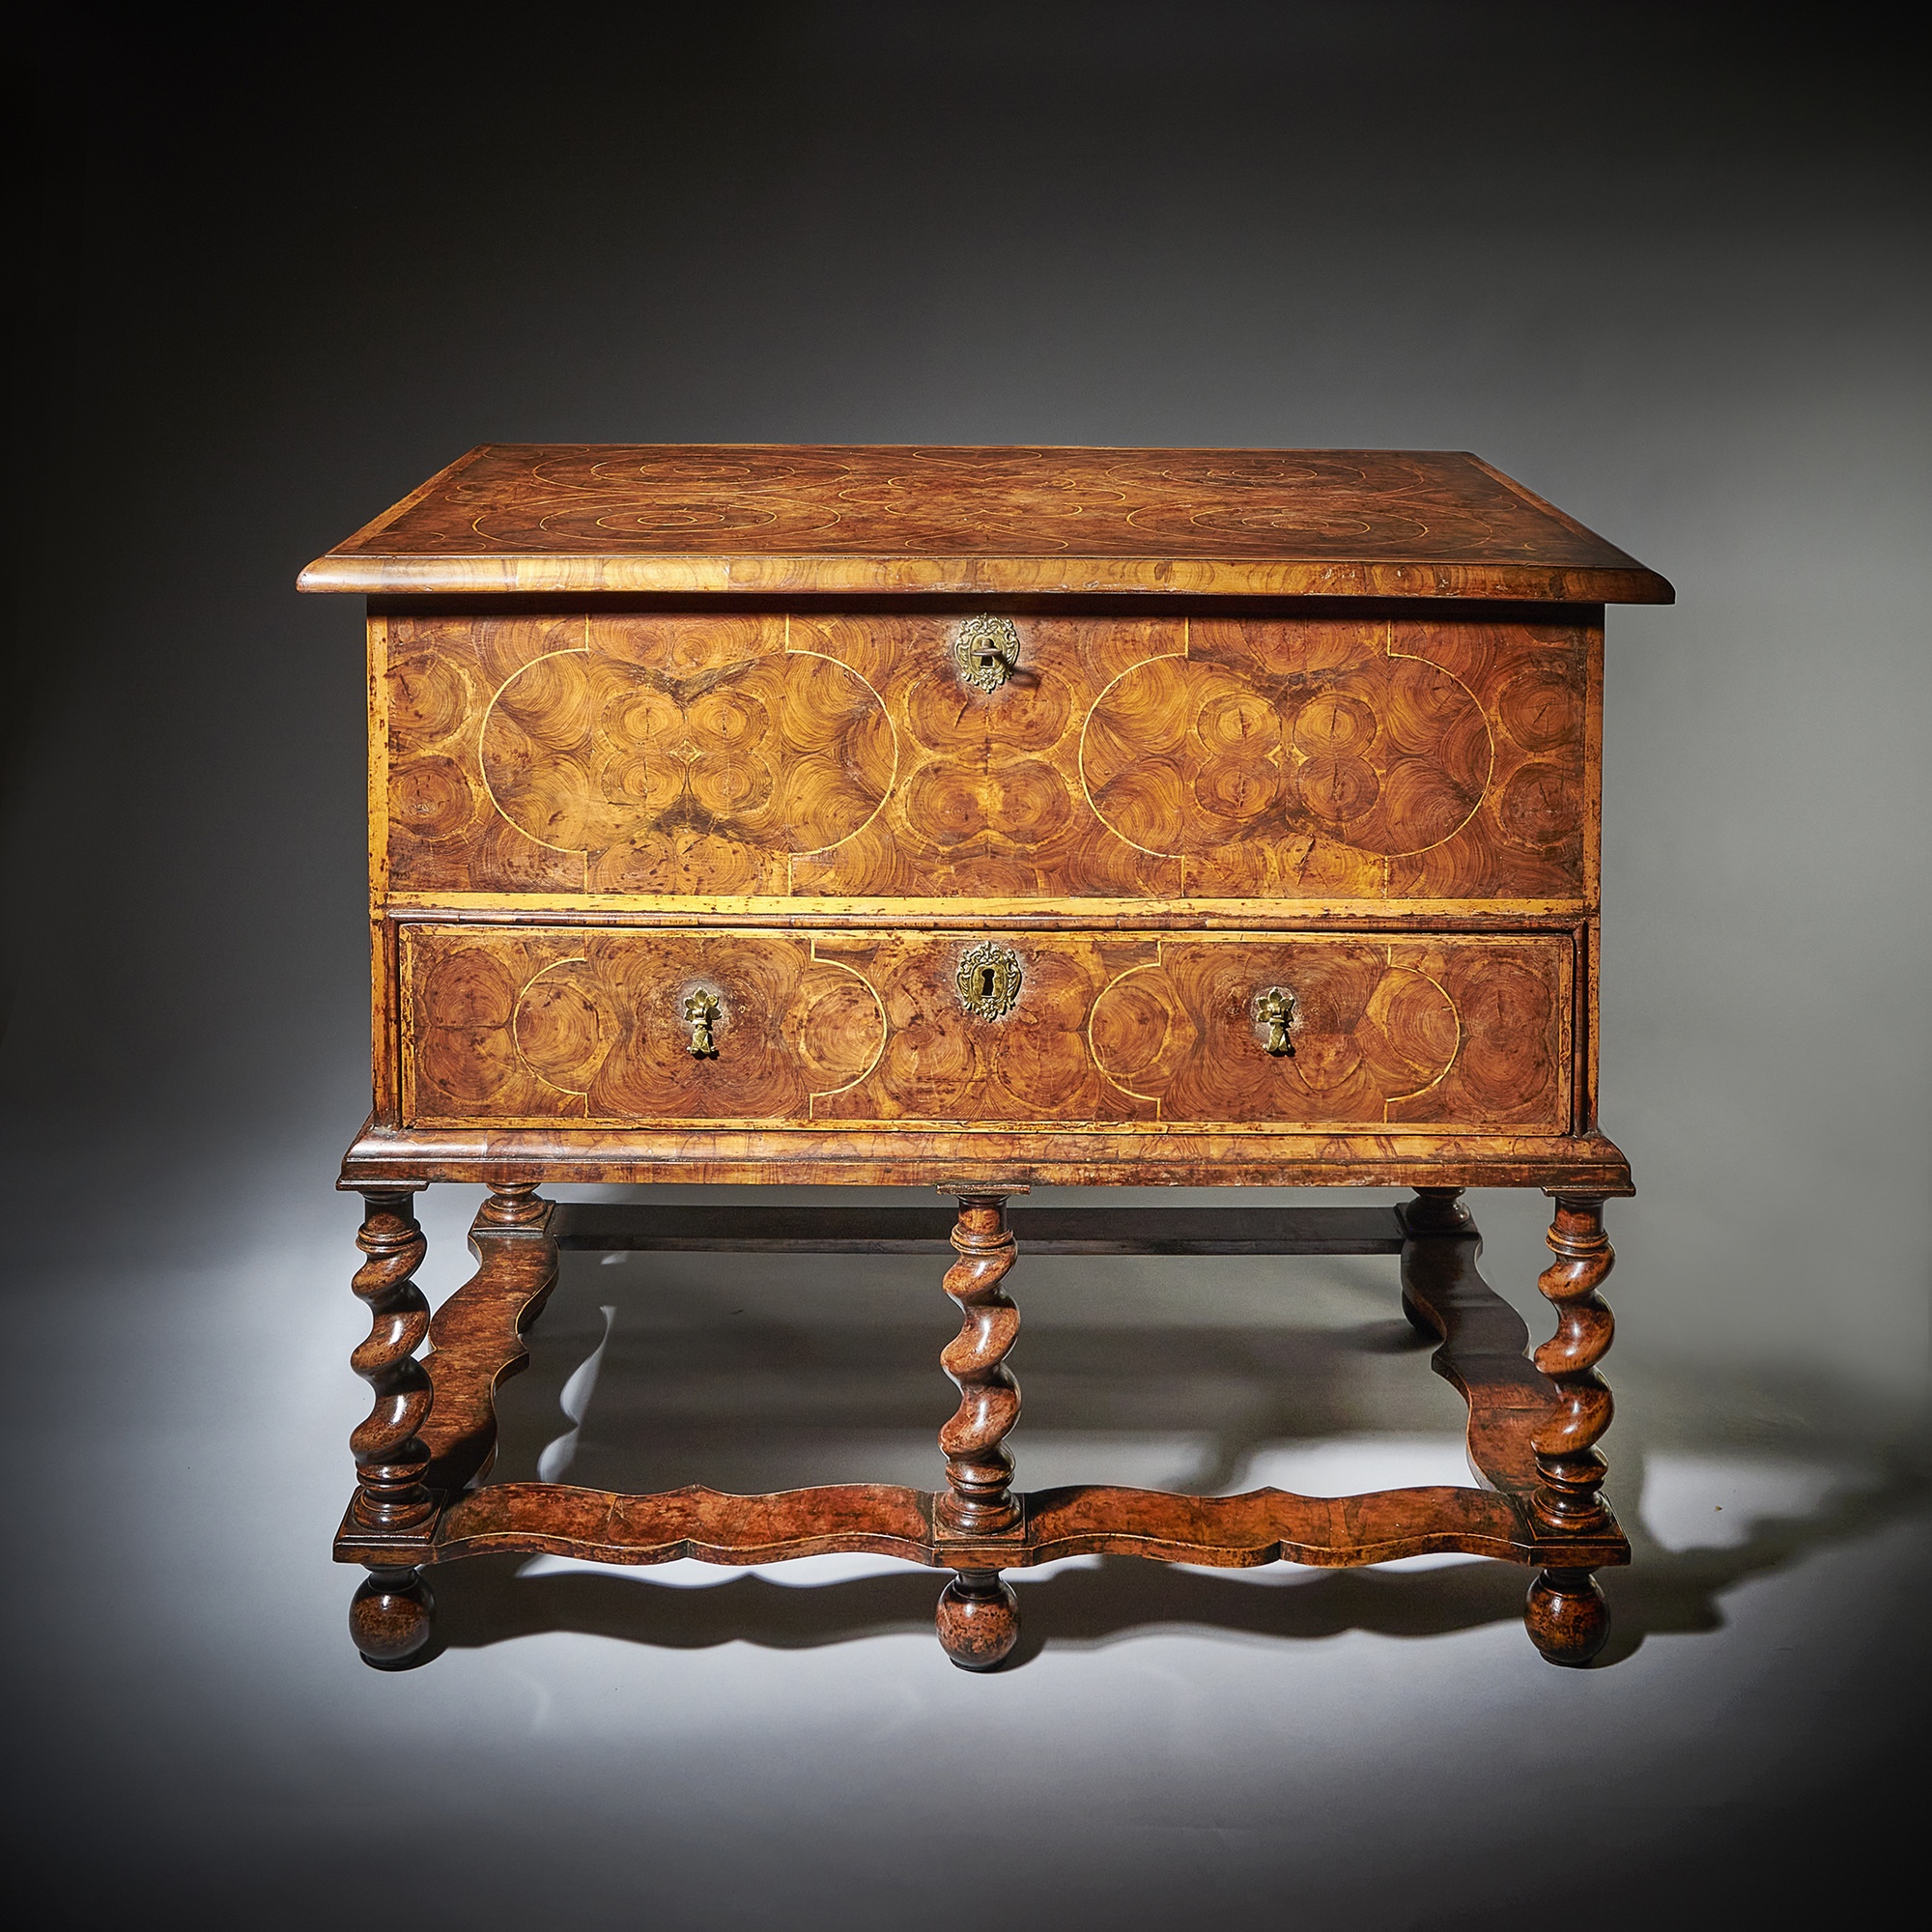 A fine and extremely rare 17th century William and Mary baroque olive oyster chest on stand or 'table box', circa 1675-1690. 15